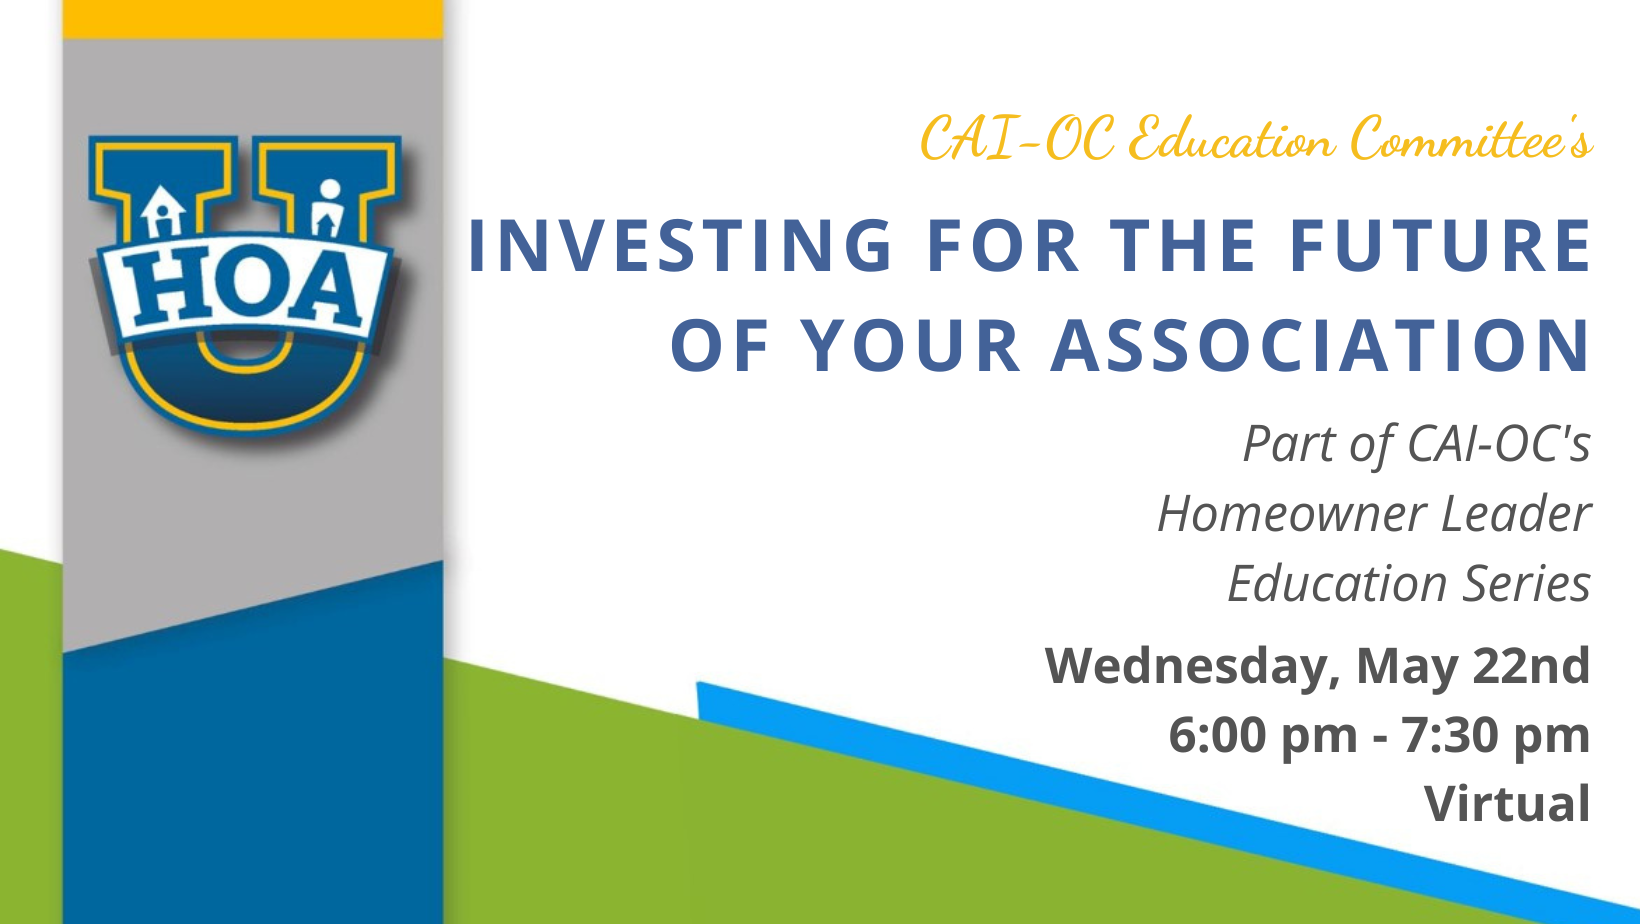 HOA U - Investing for the Future of Your Association